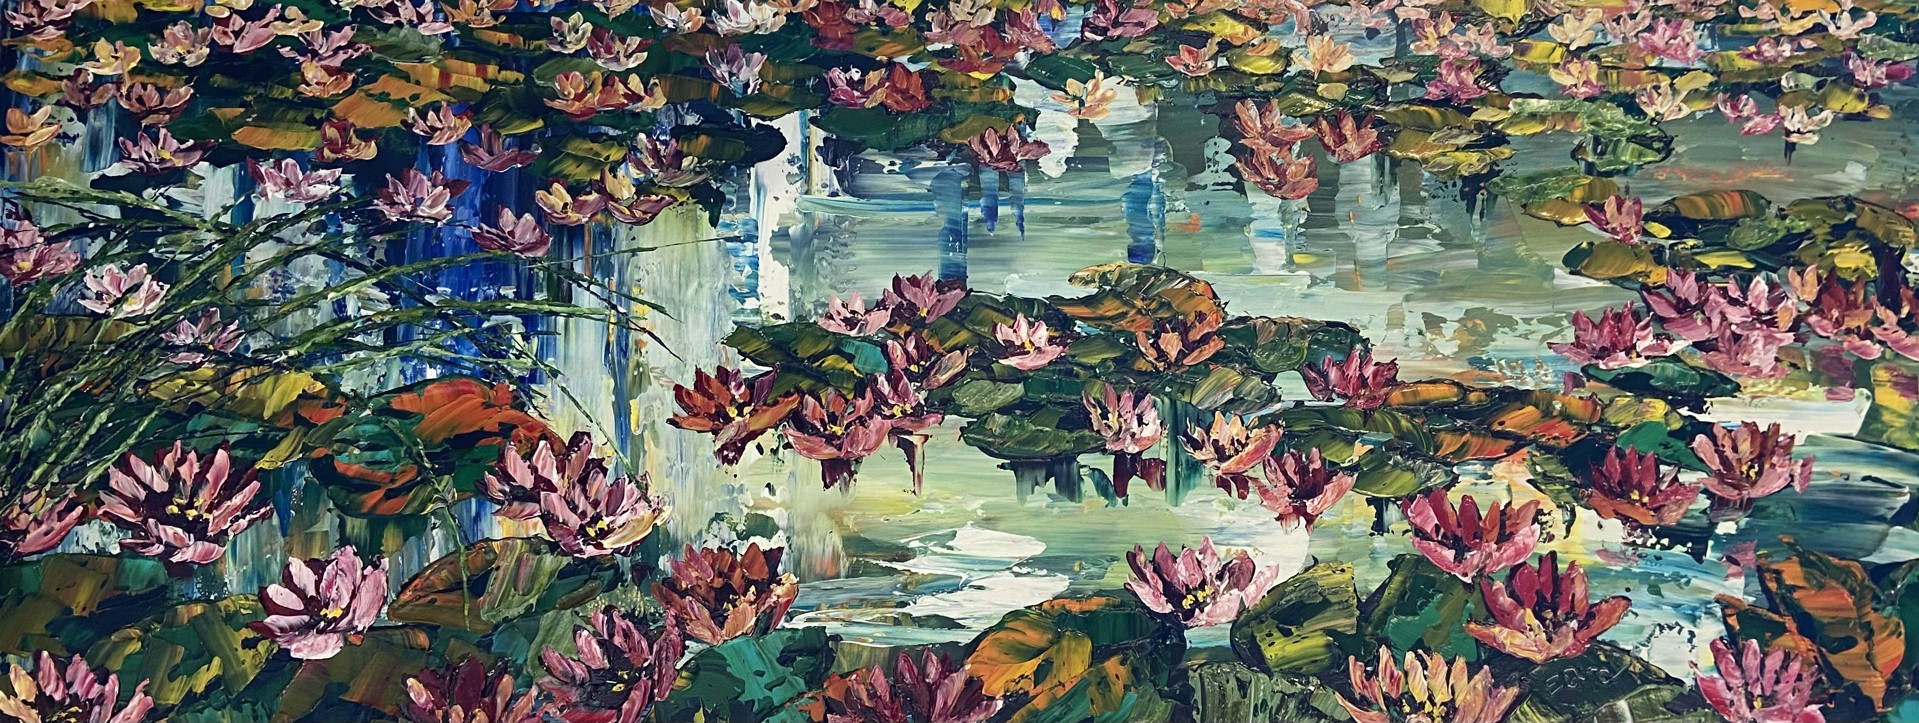 Commission:  Water Lilies by Maya Eventov